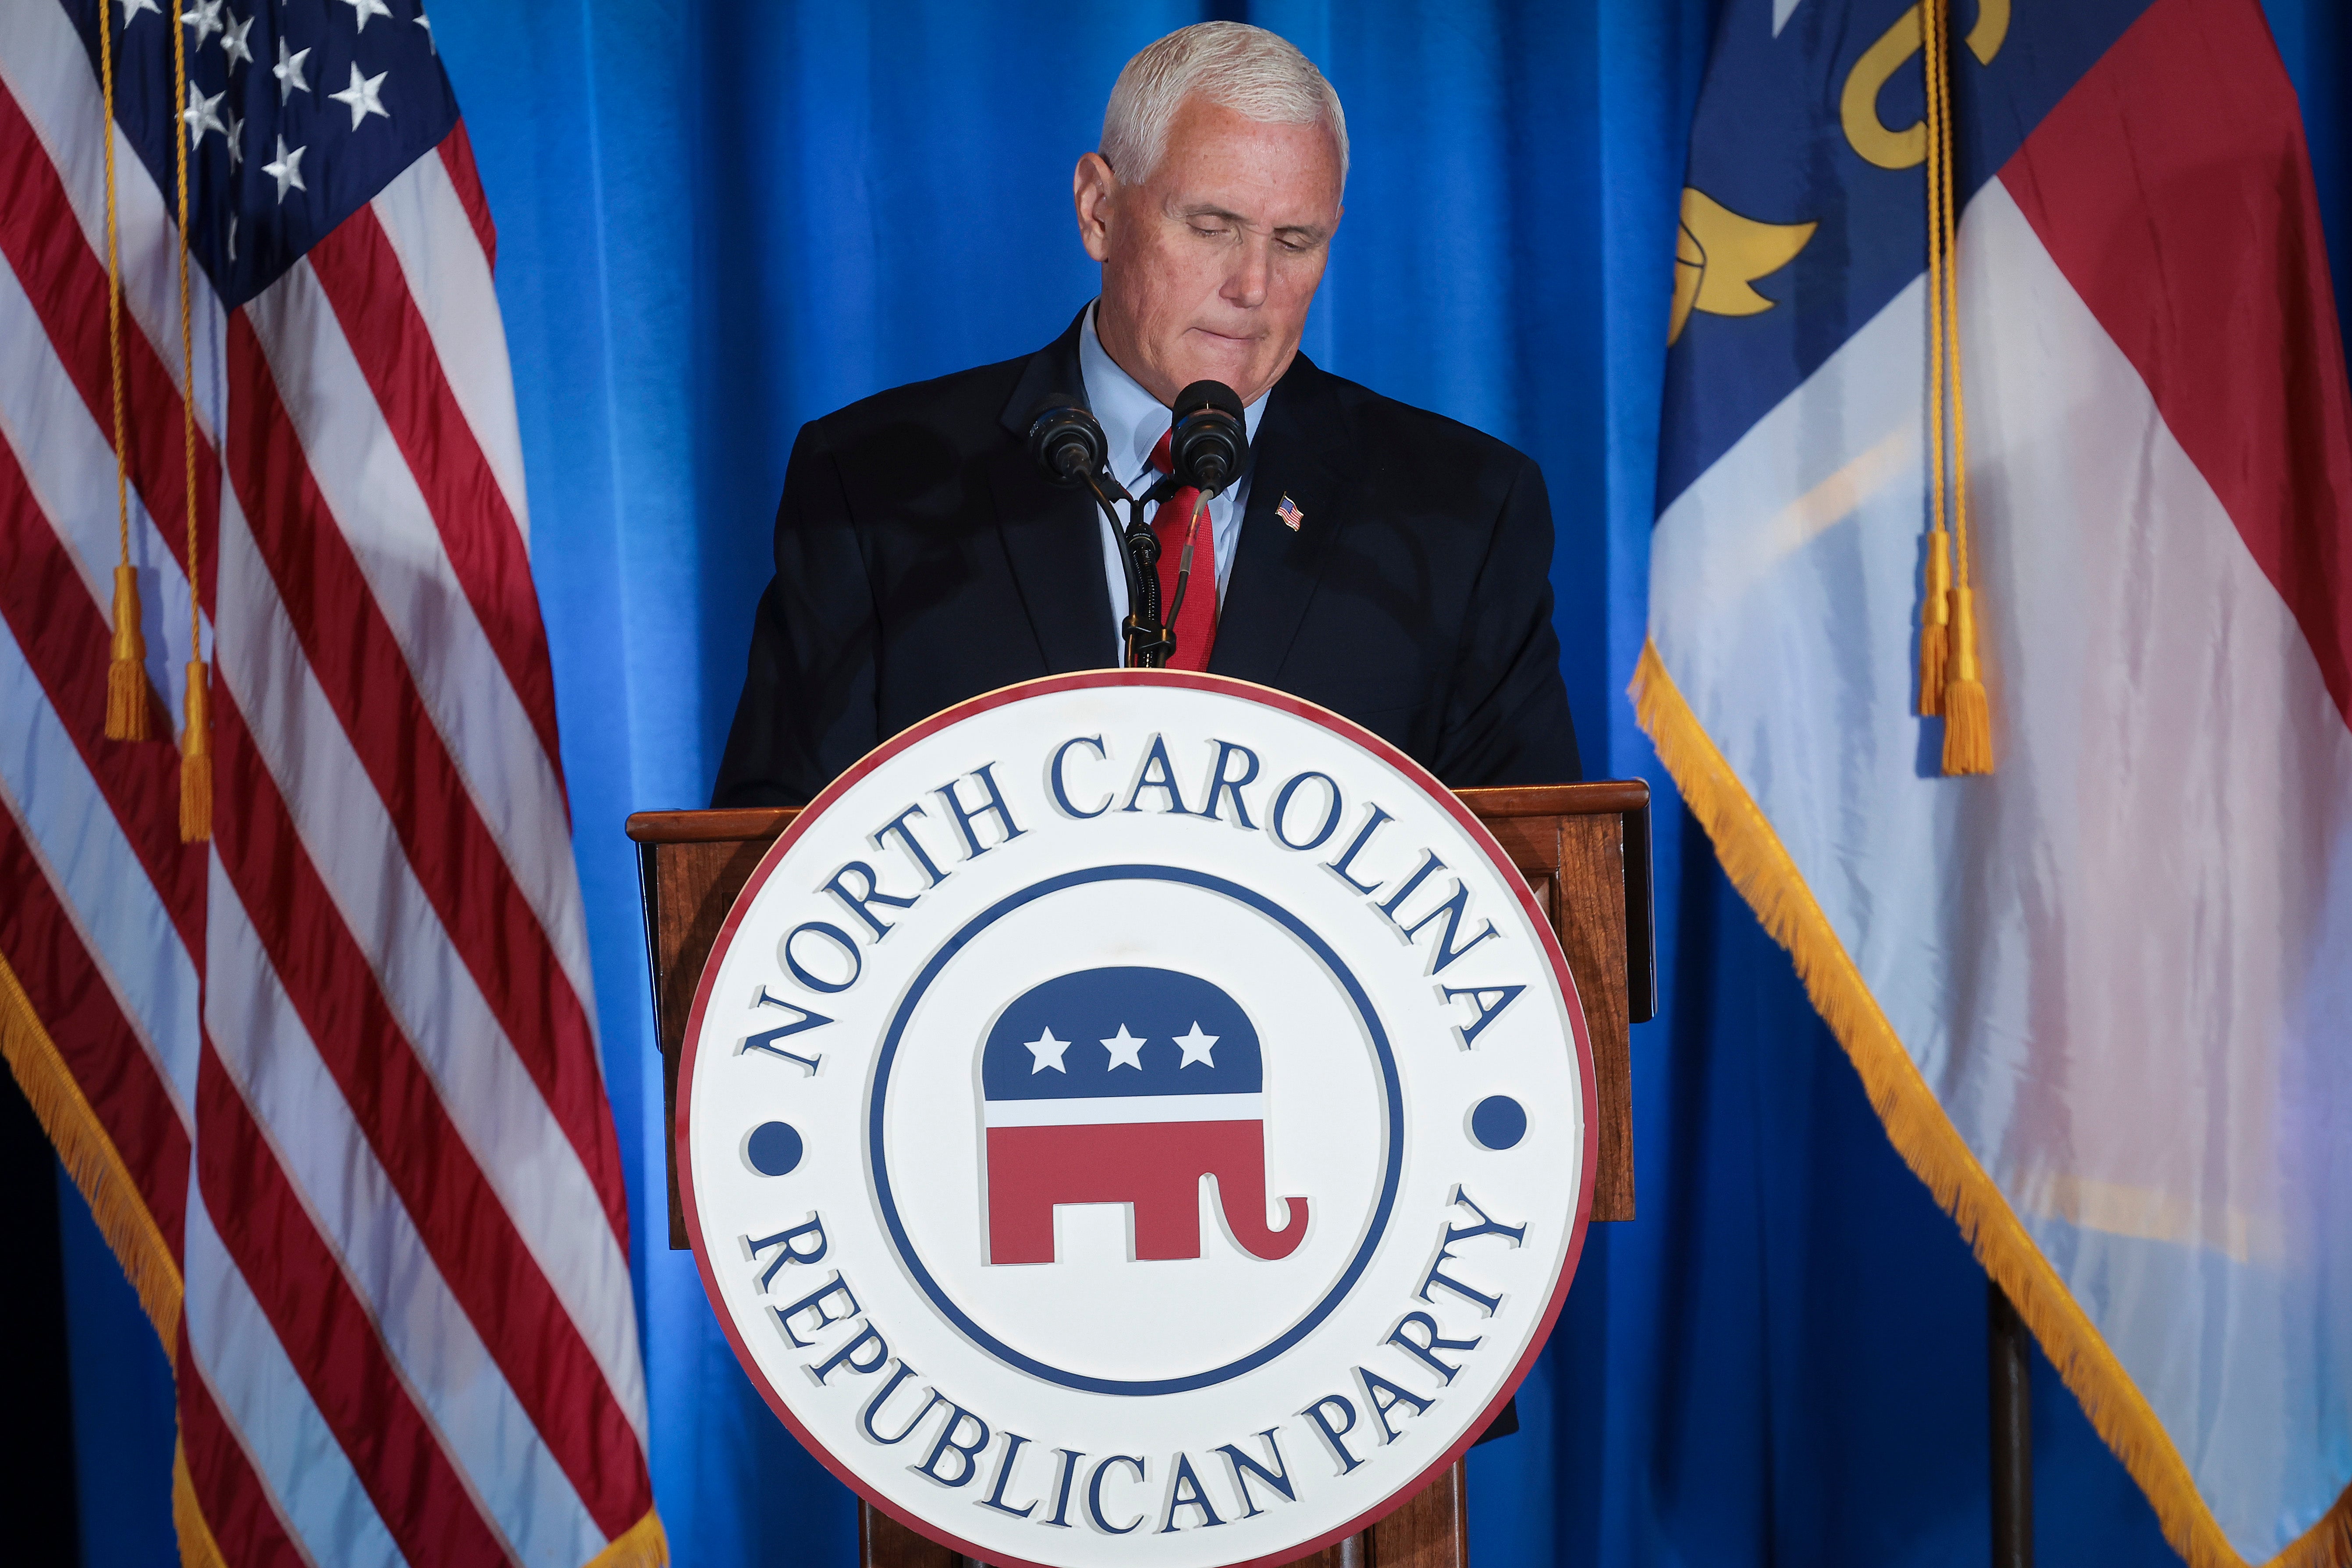 Mike Pence speaking at a GOP convention on 10 June